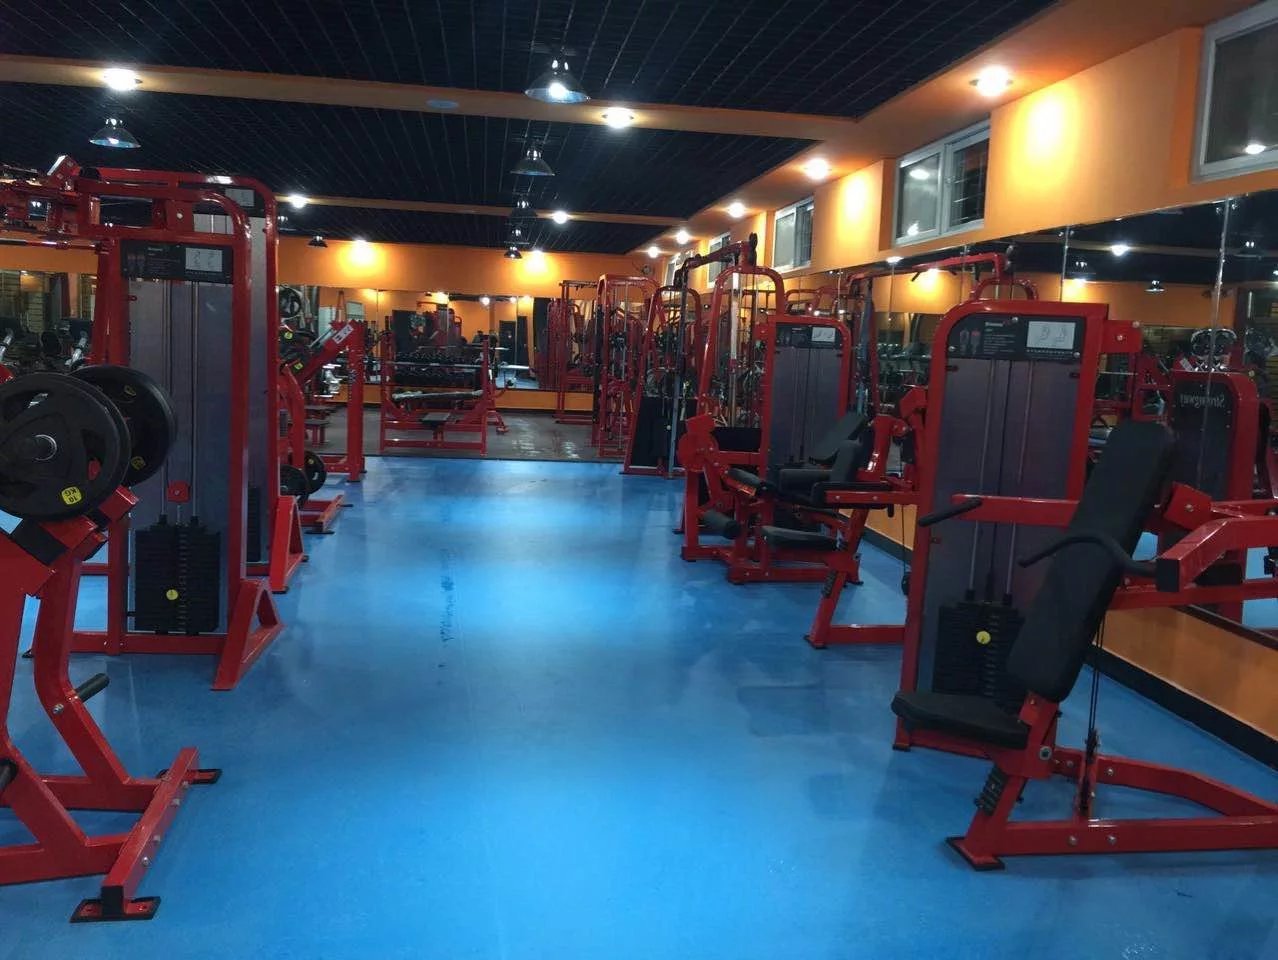 Gyms that have worked overseas